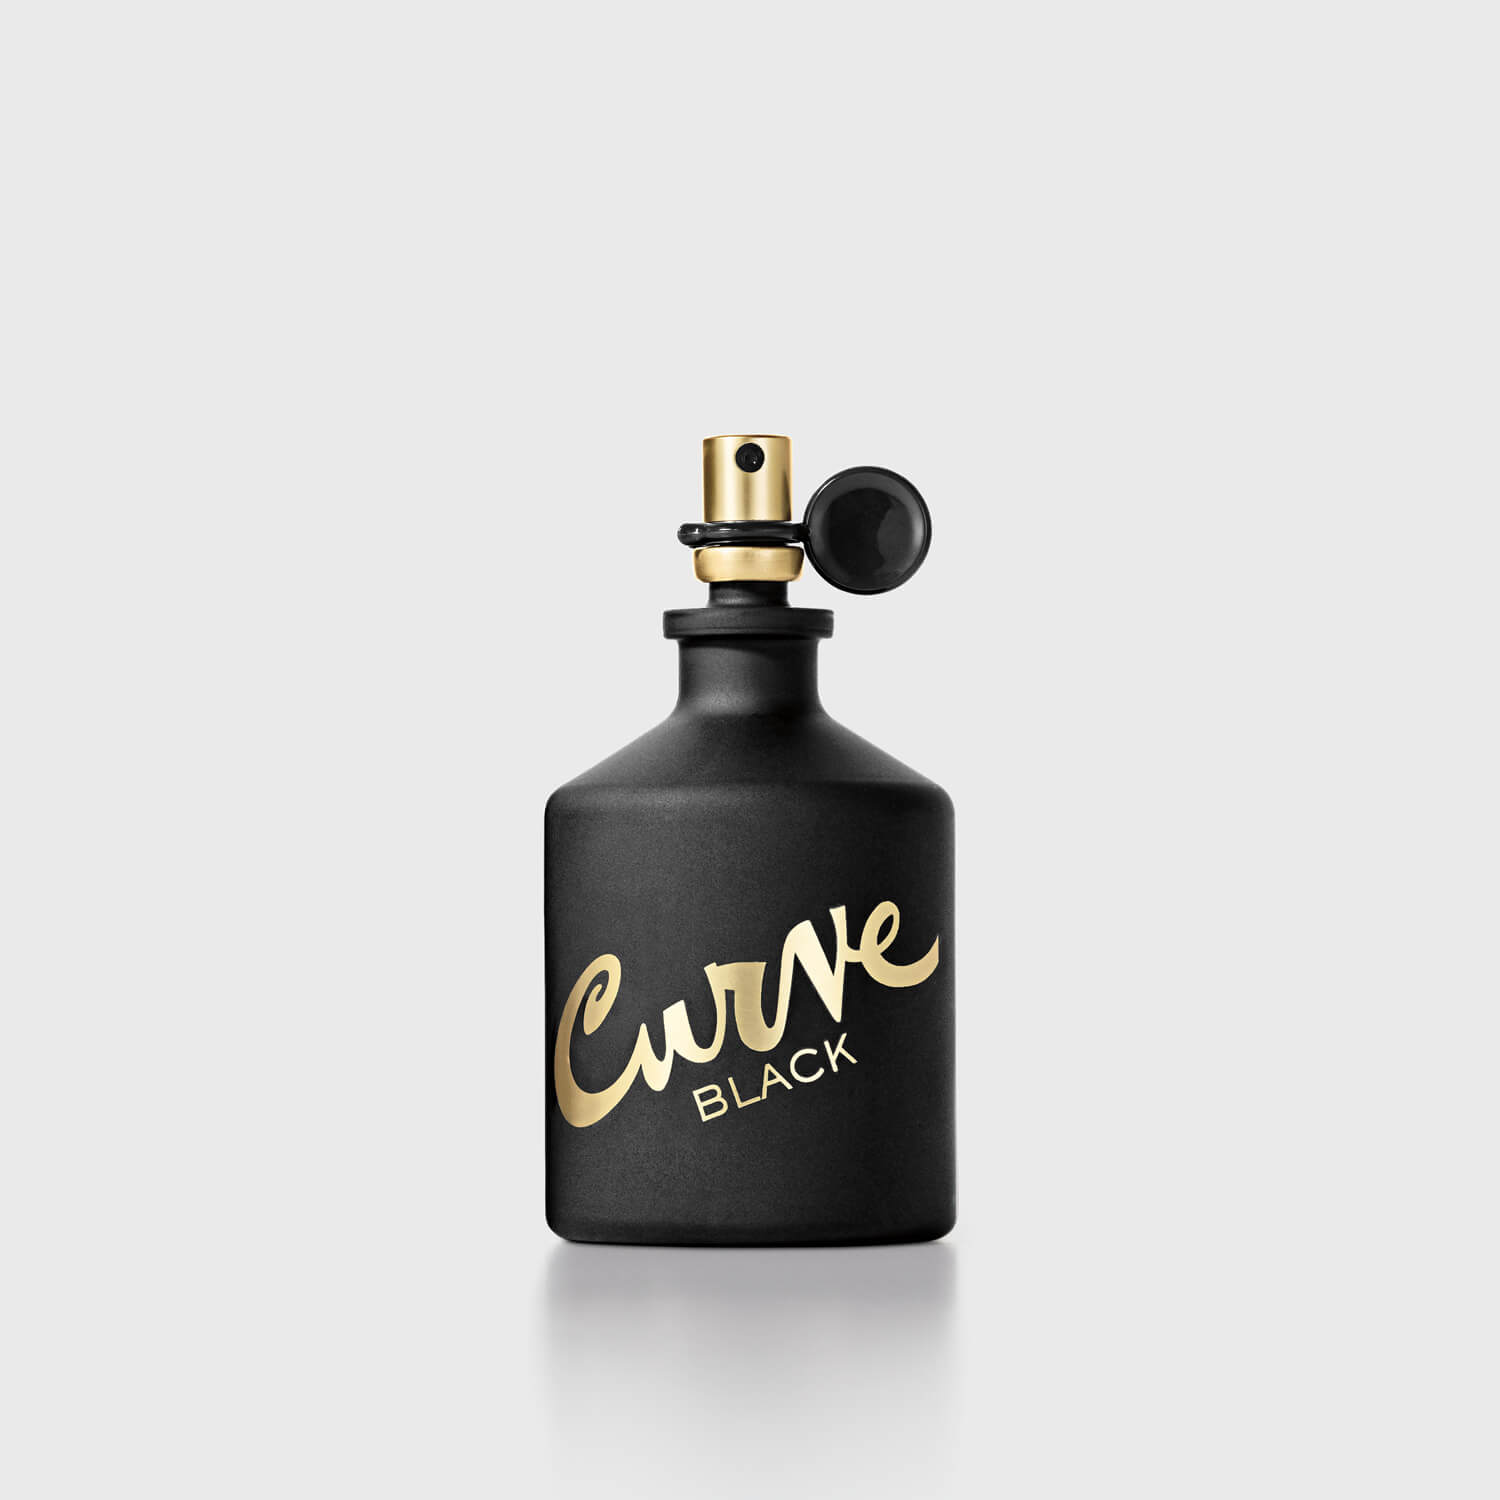  Curve Men's Cologne Fragrance Spray, Casual Cool Day